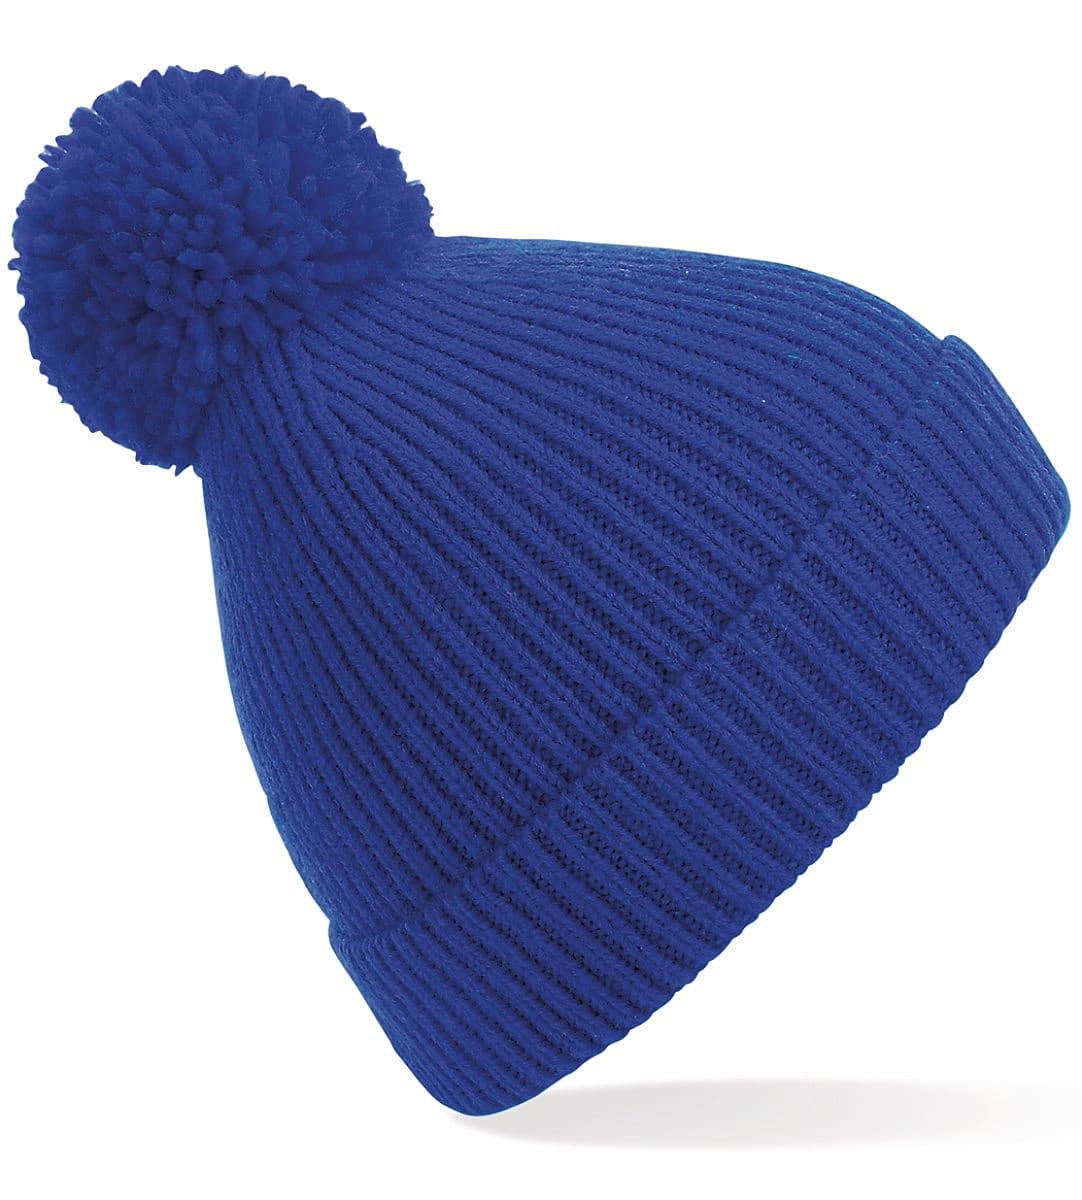 Beechfield Knit Ribbed Pom Pom Beanie Hat in Bright Royal (Product Code: B382)